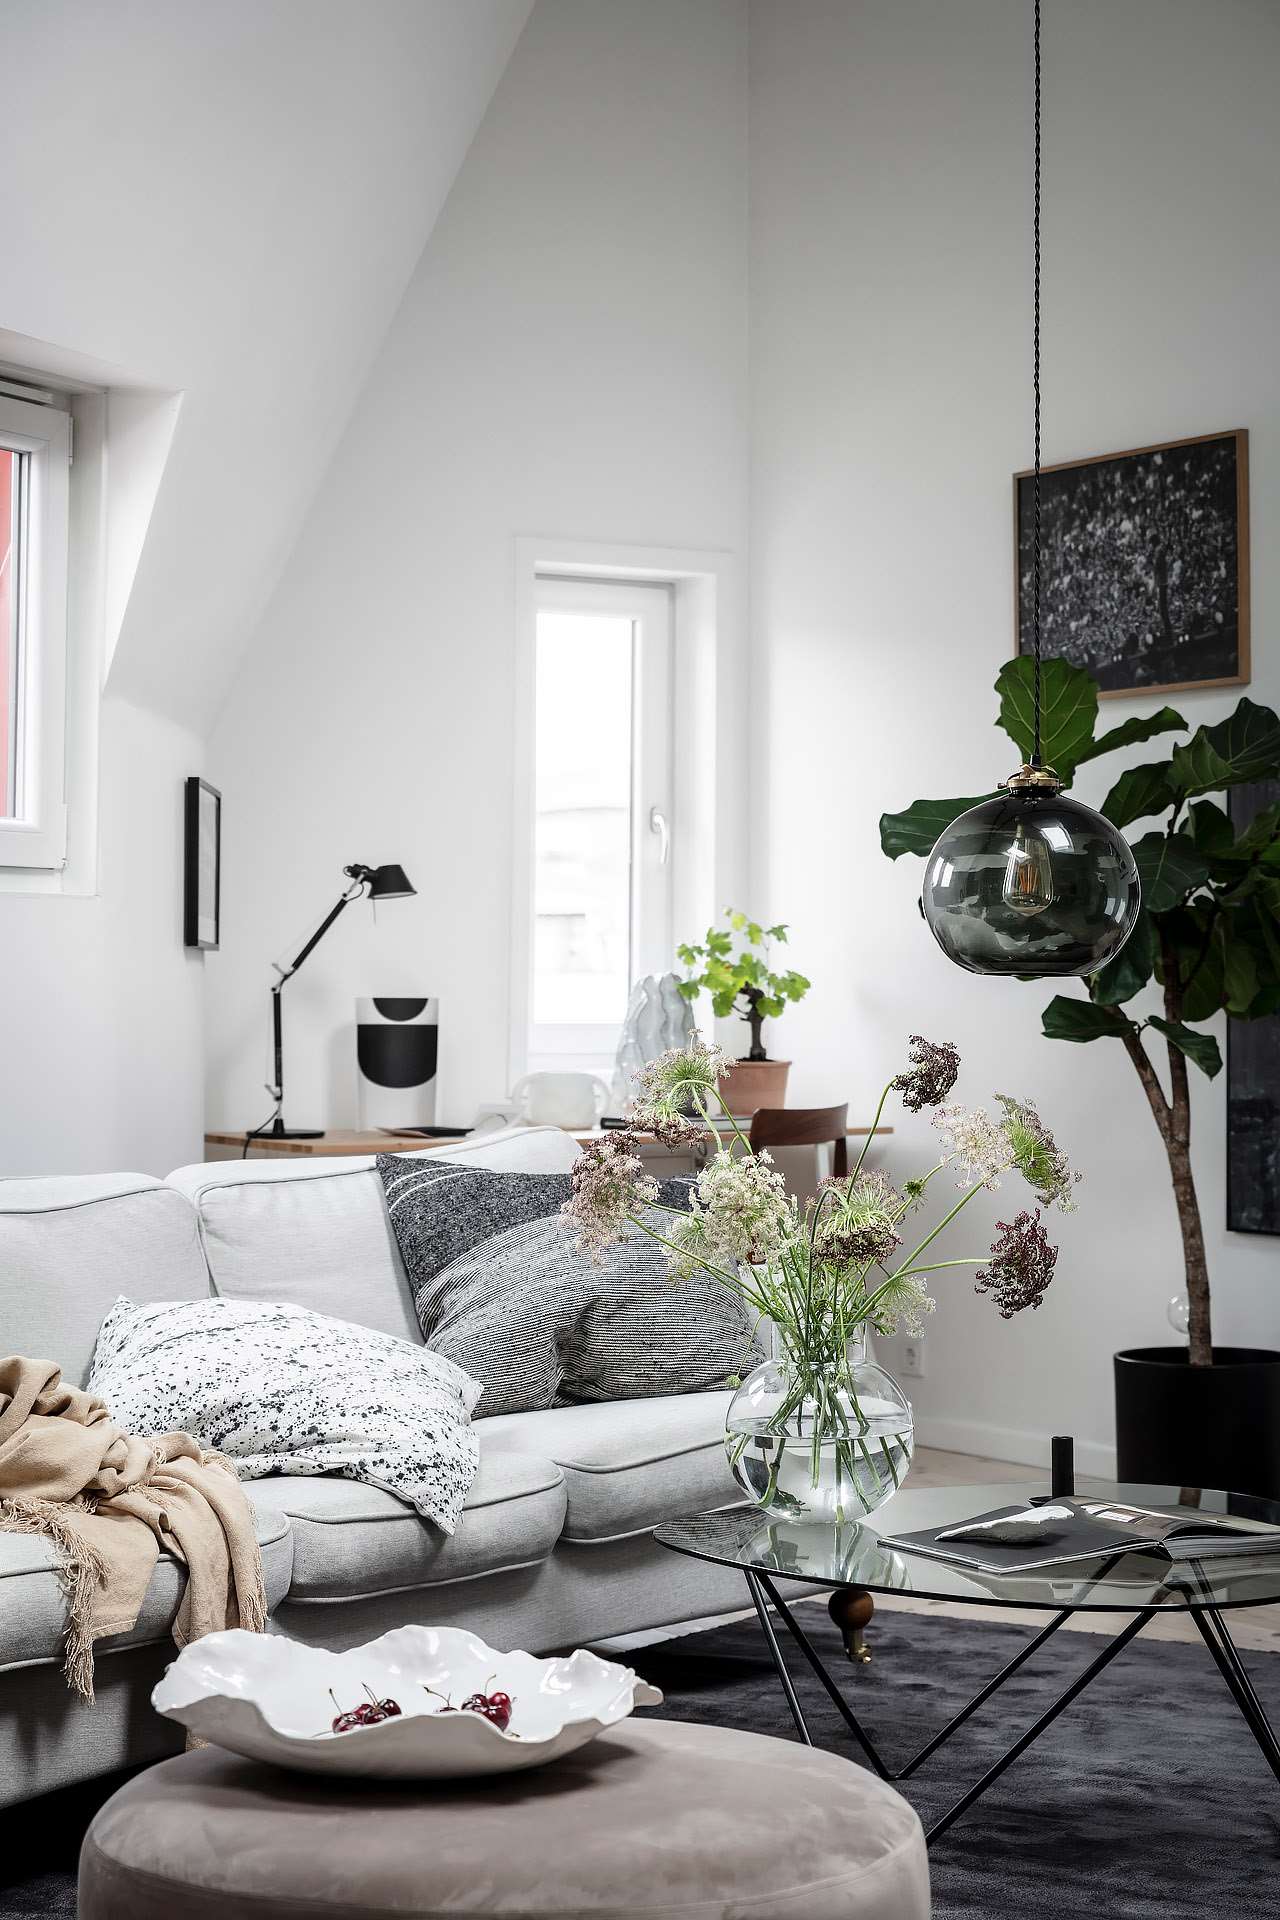 Add Comfy Pillows + a Throw to Make it Cozy